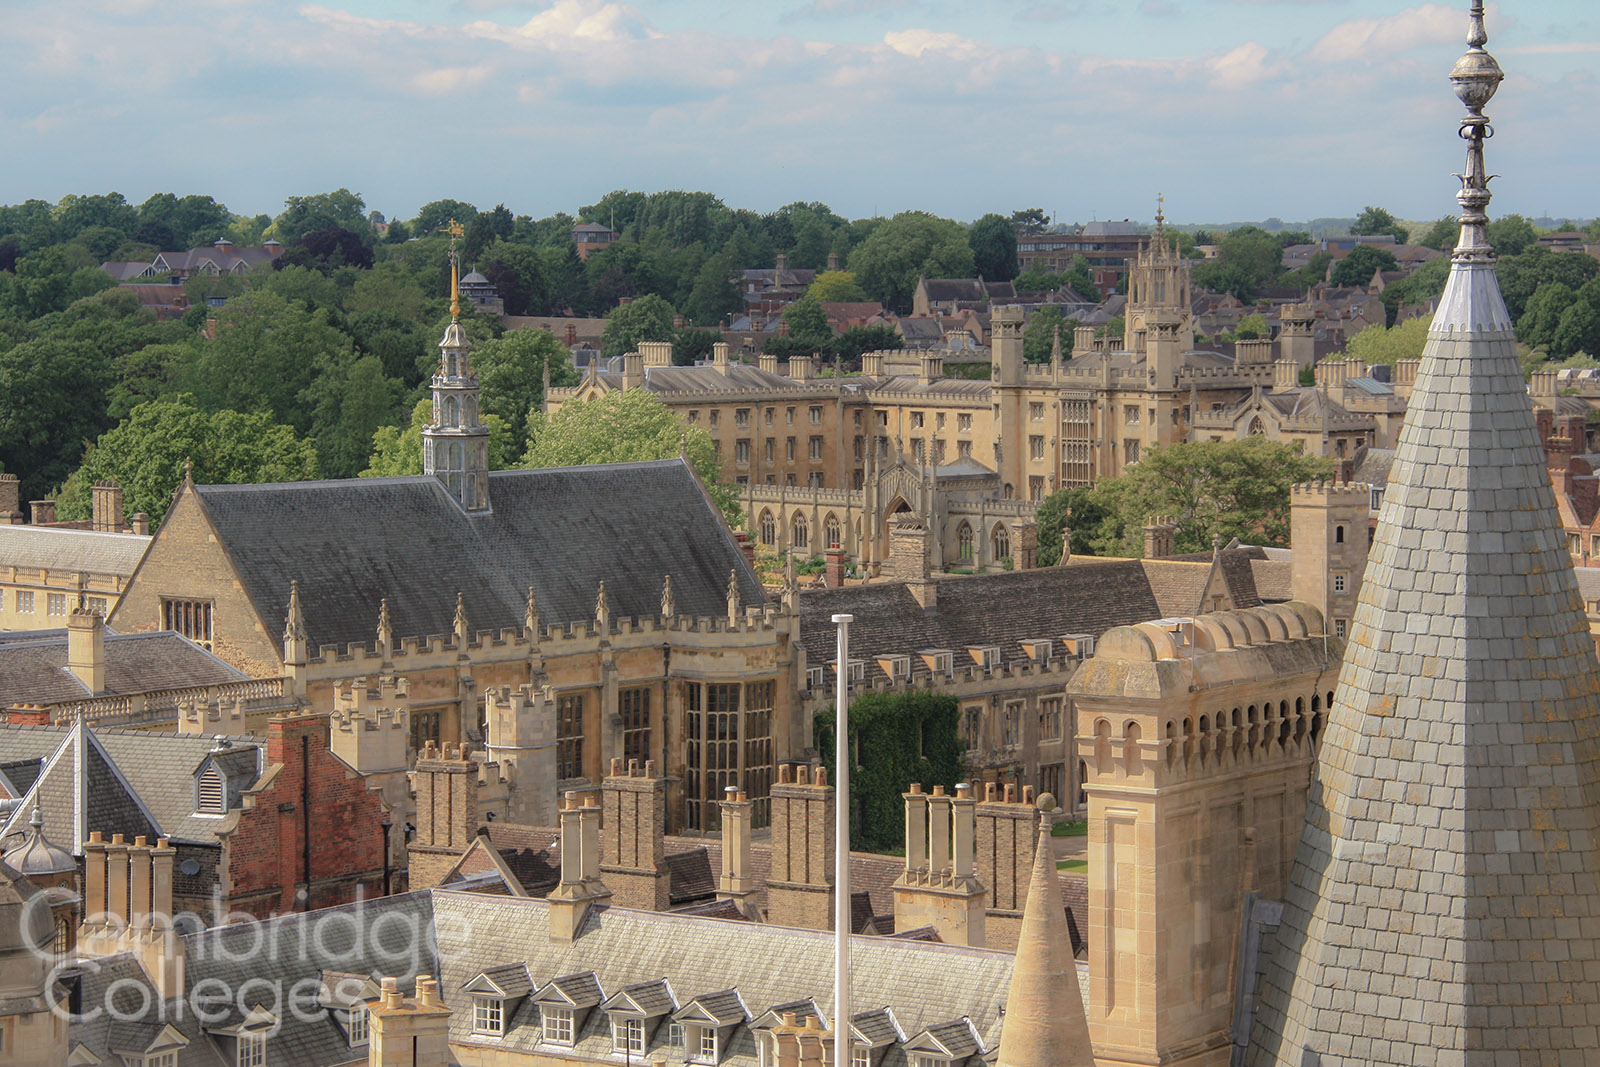 Looking out over Cambridge's city centre colleges from the tower of the University church, Great St Mary's